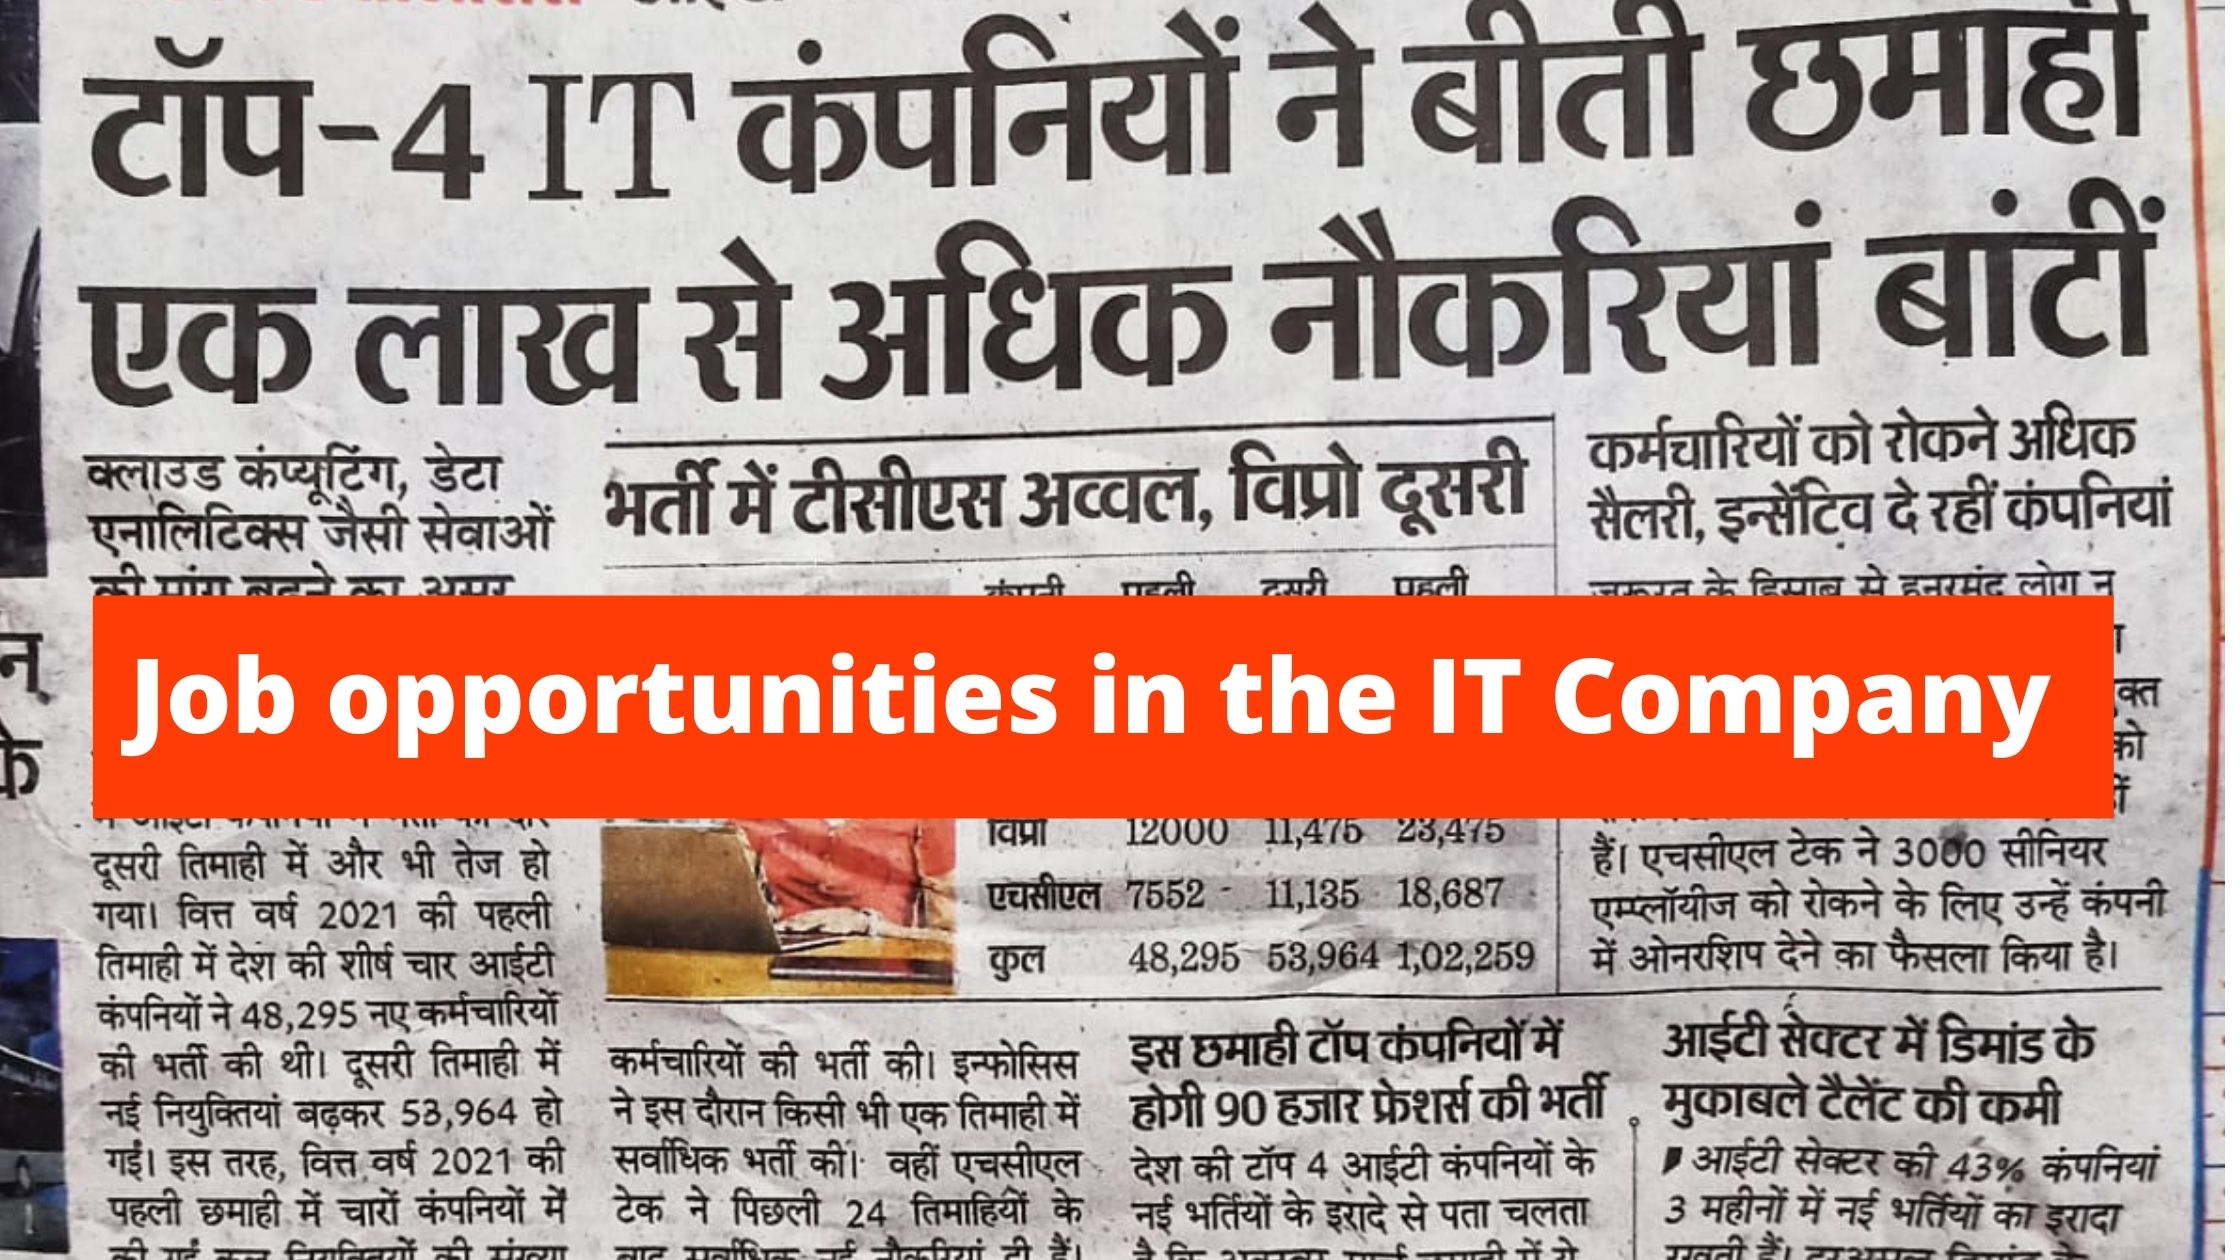 Job opportunities in the IT Company